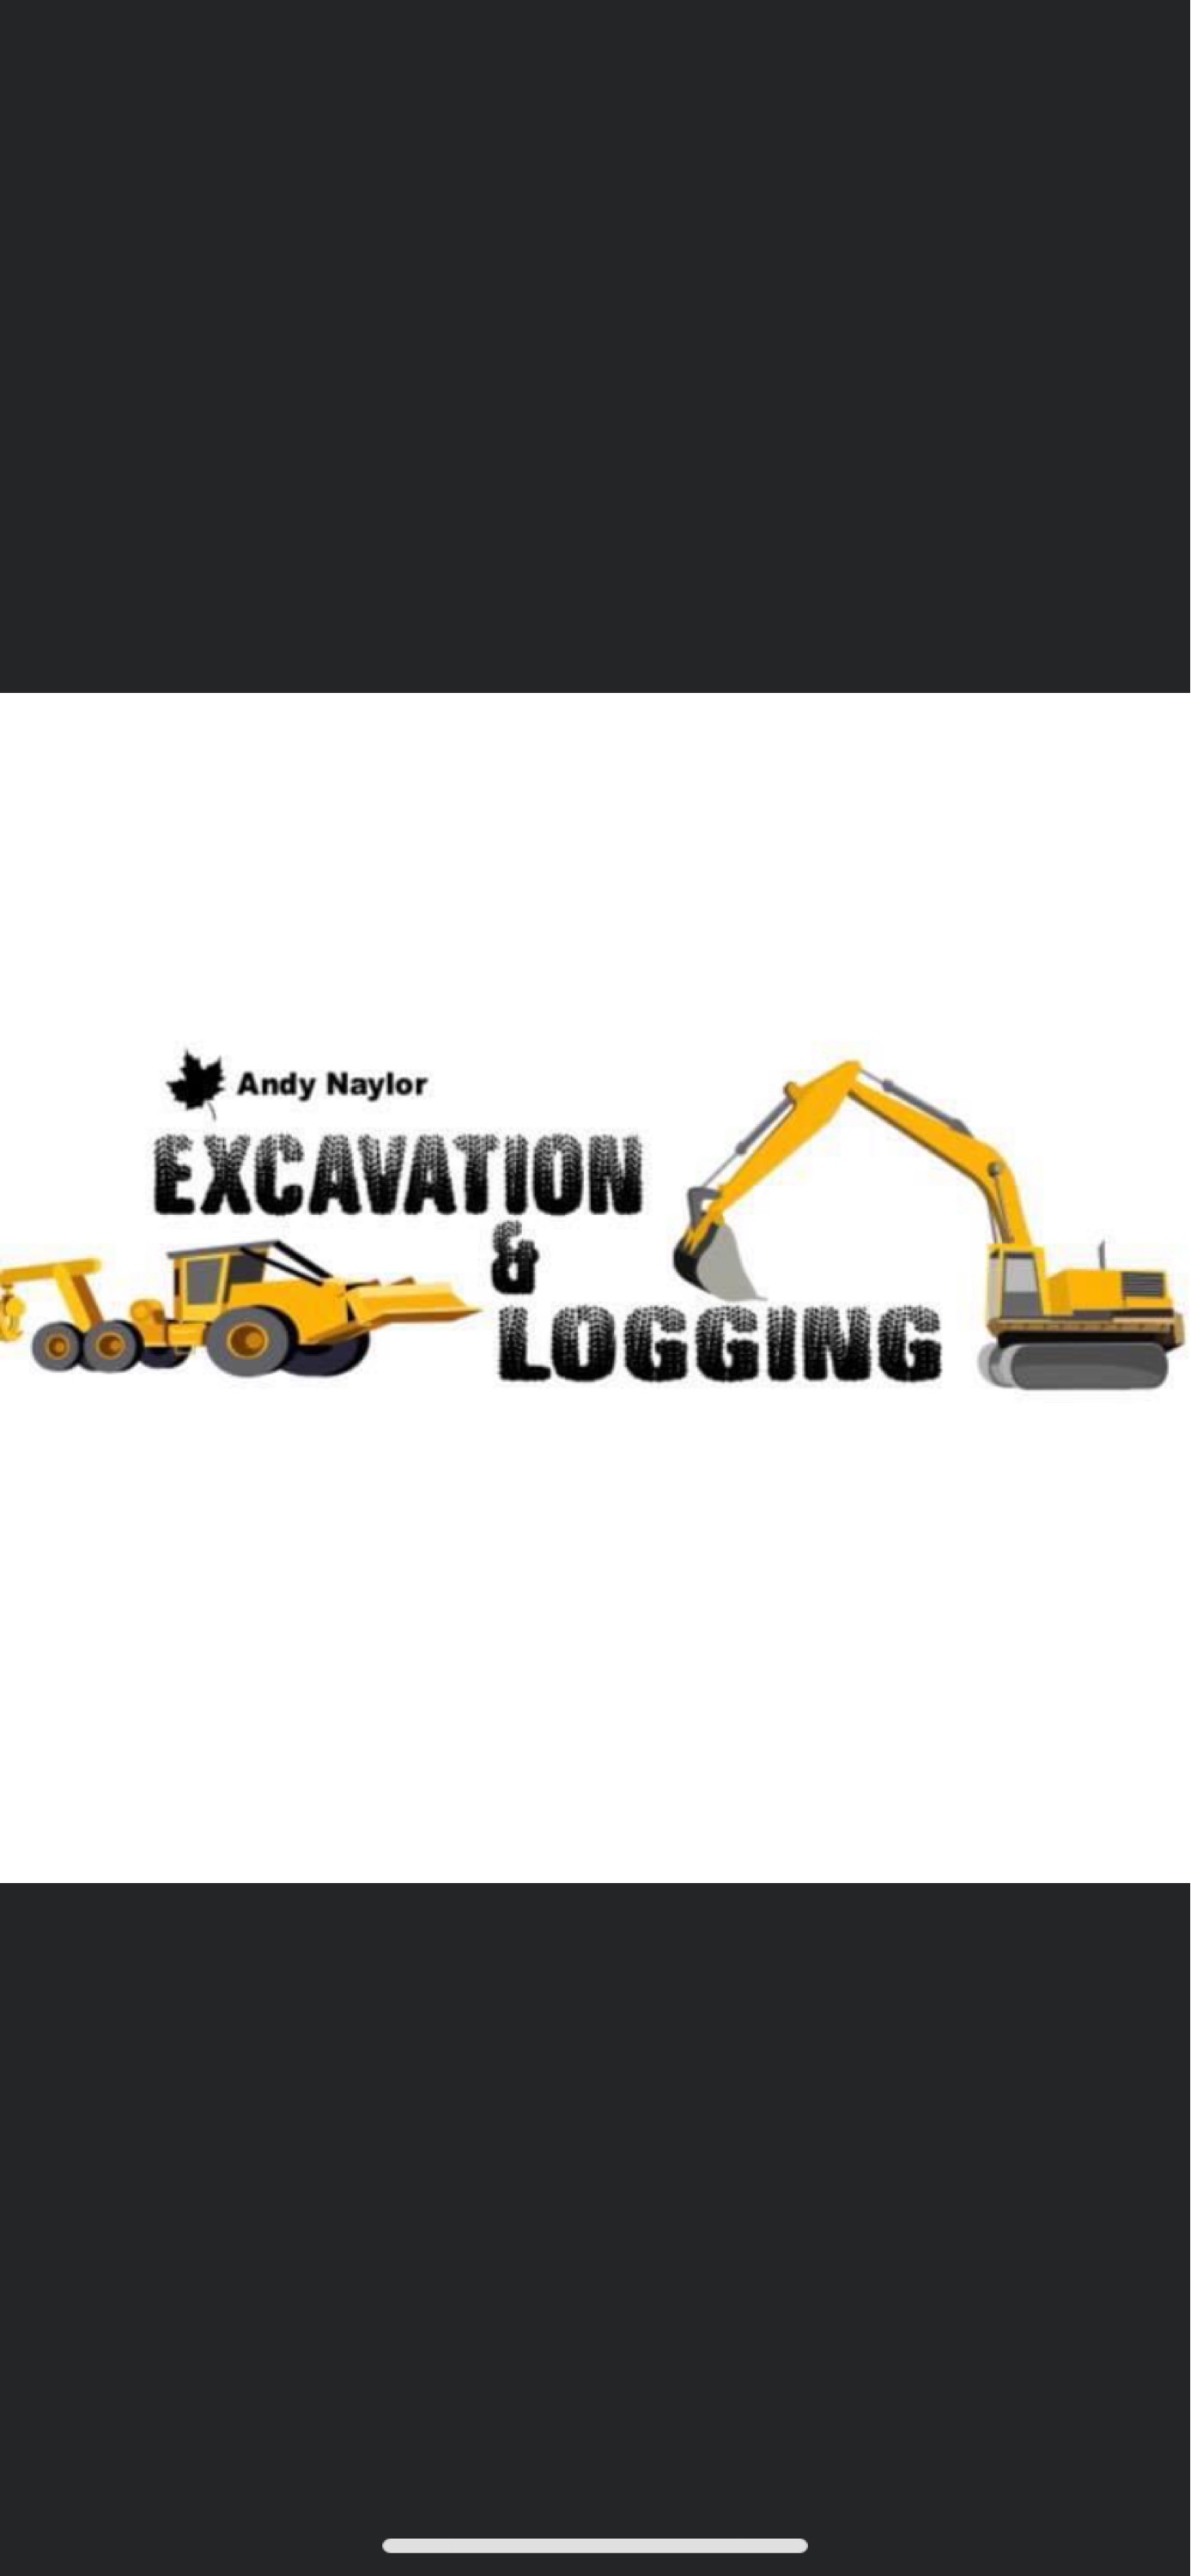 Andy Naylor Excavation Logo